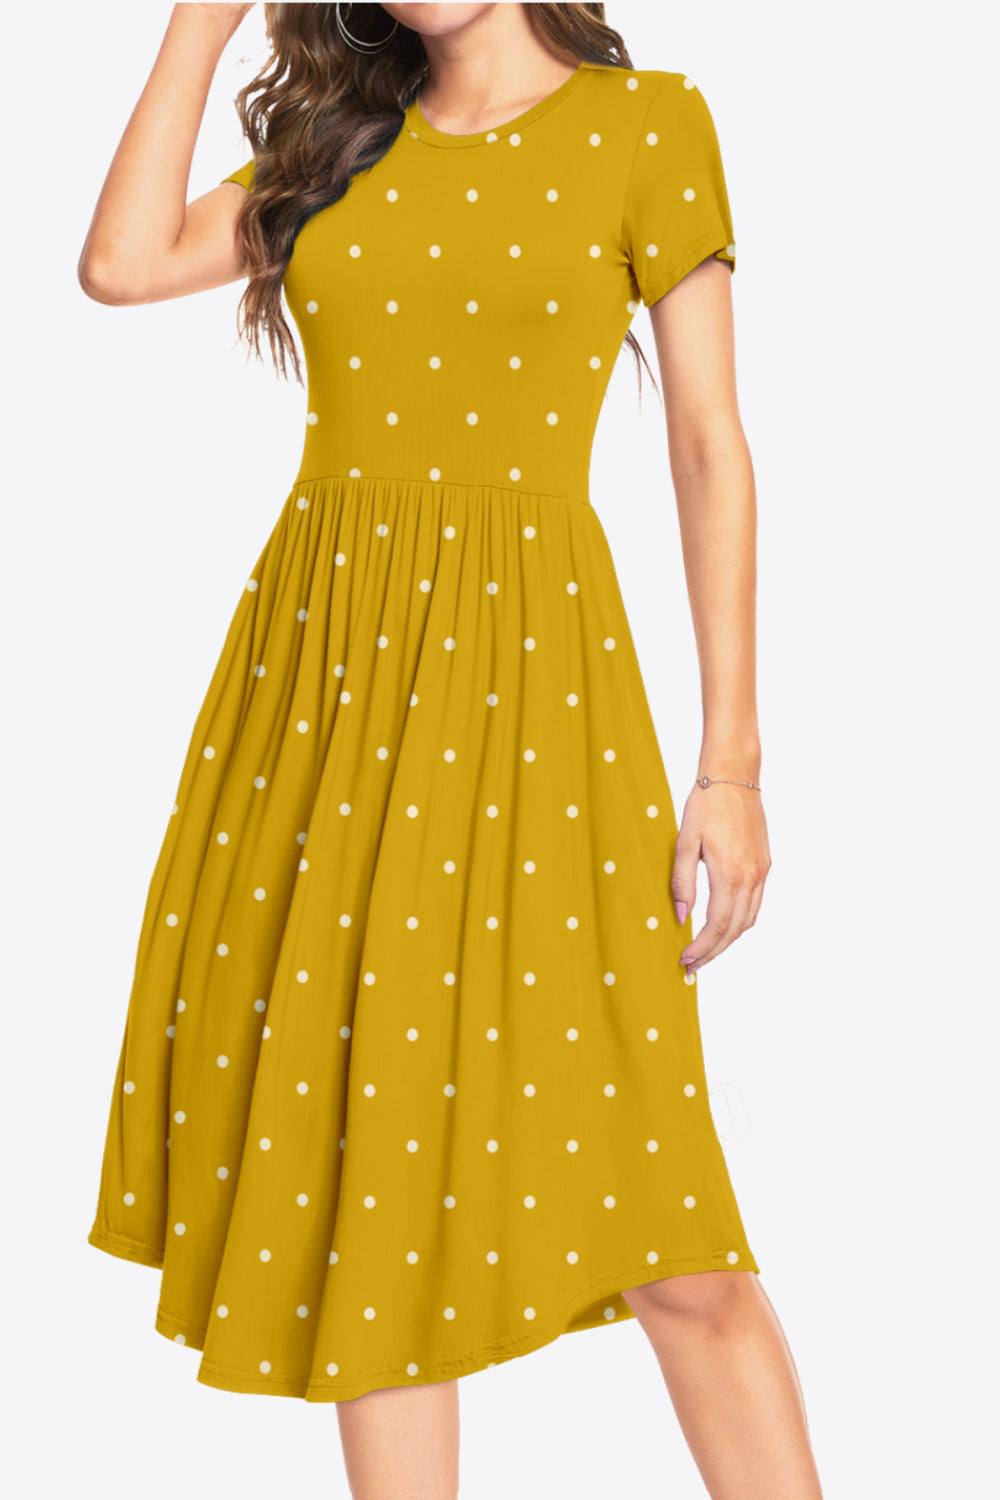 Printed Round Neck Short Sleeve Dress with Pockets